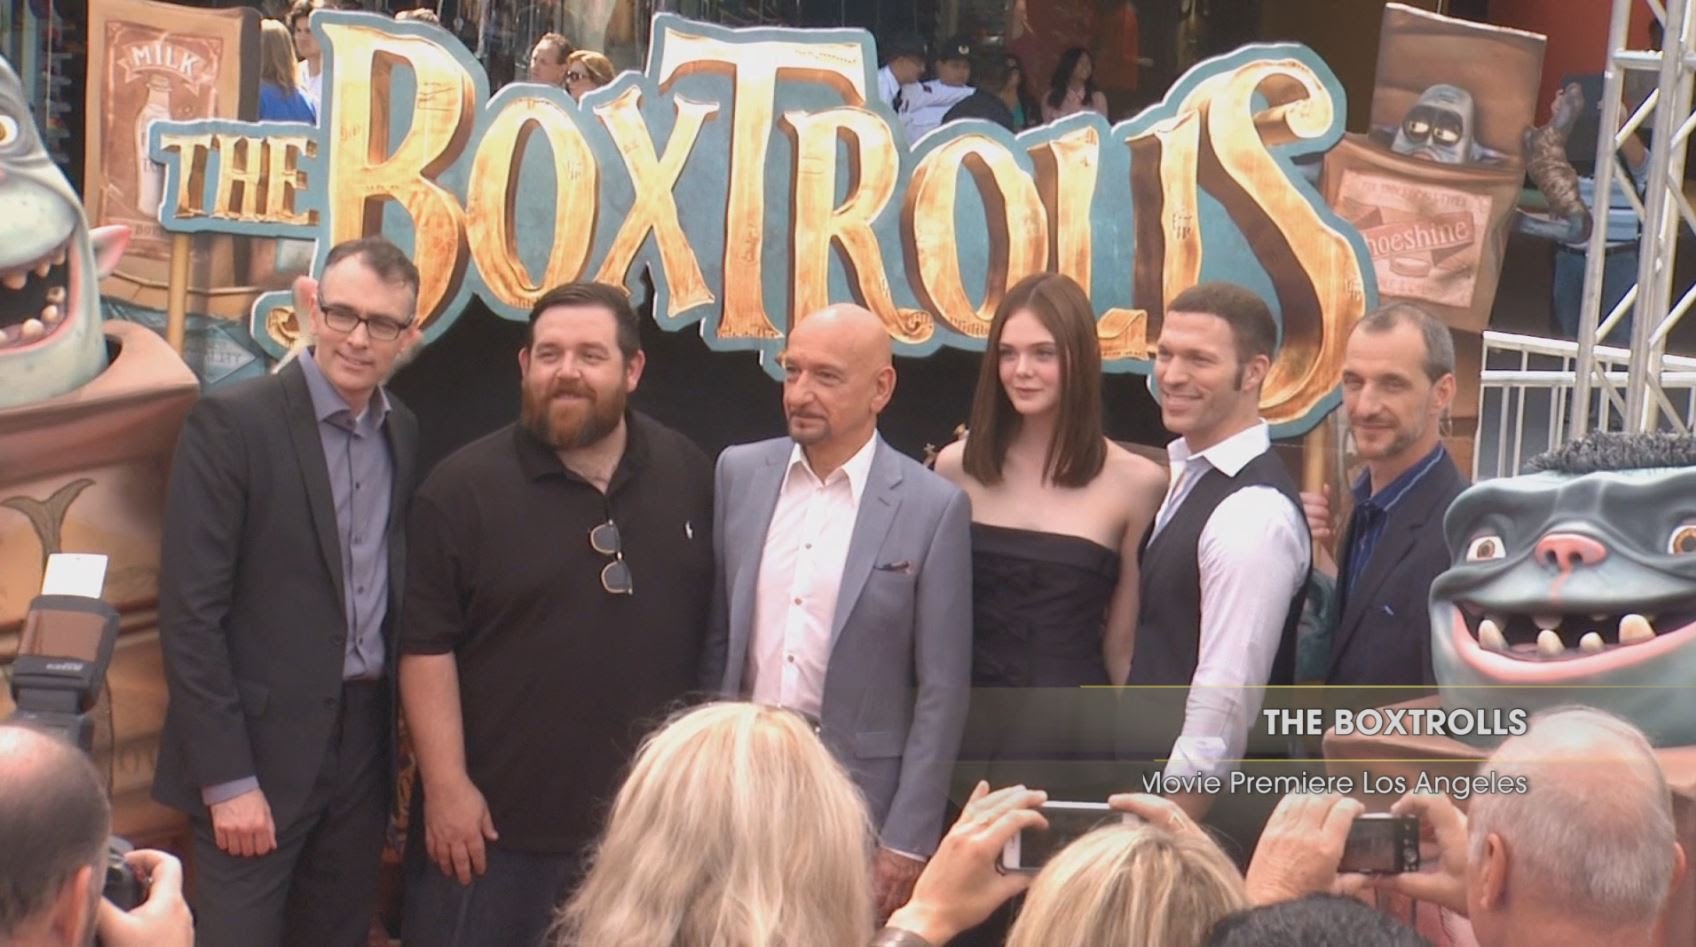 FashionOne takes you to the movie premier of The Boxtrolls in Los Angeles